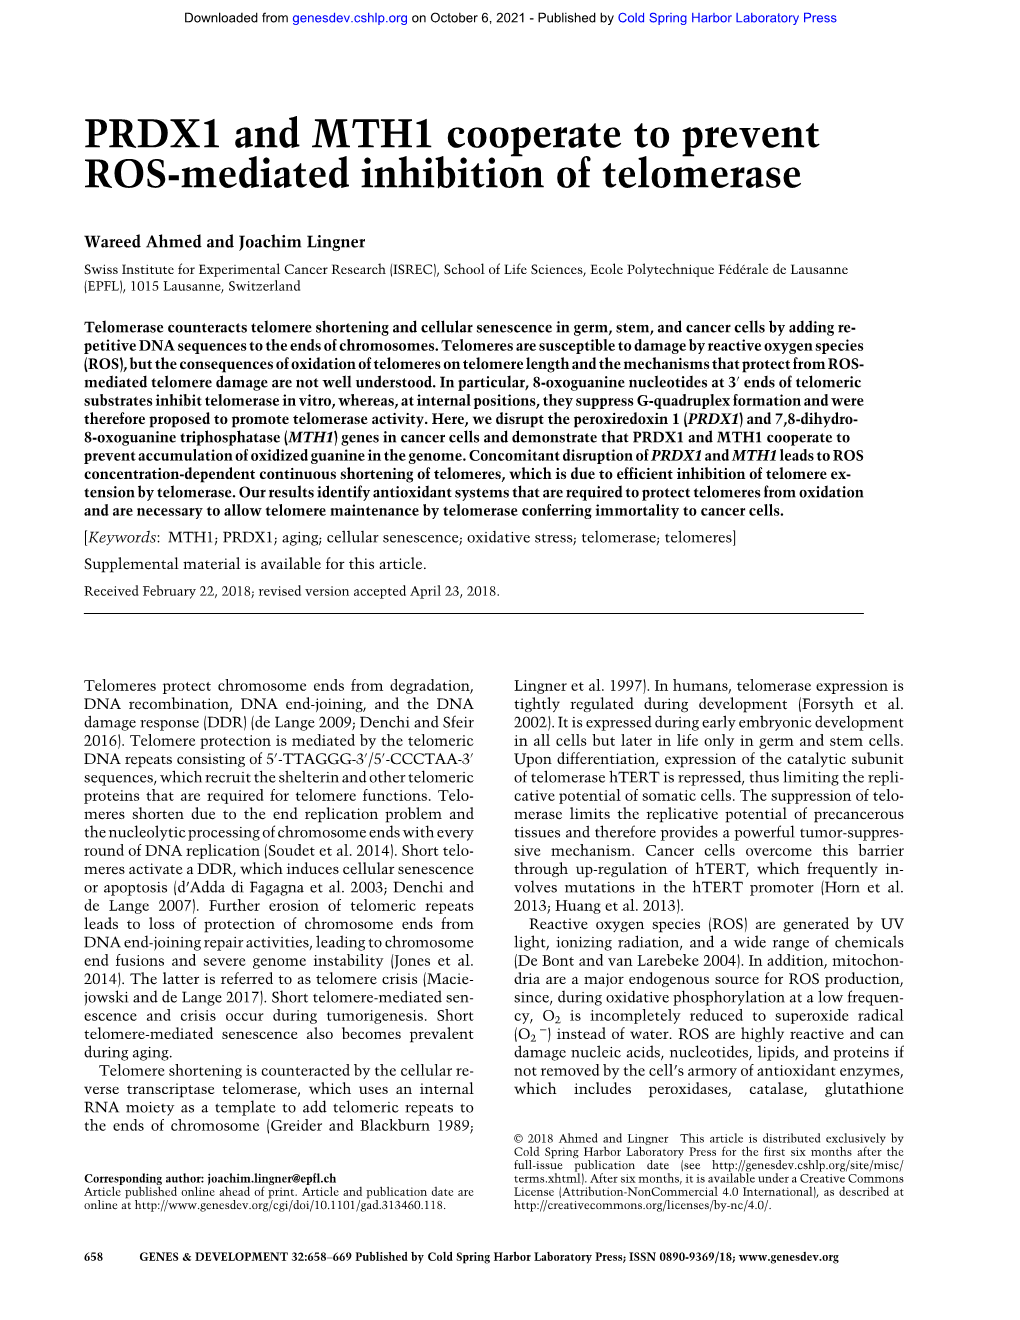 PRDX1 and MTH1 Cooperate to Prevent ROS-Mediated Inhibition of Telomerase